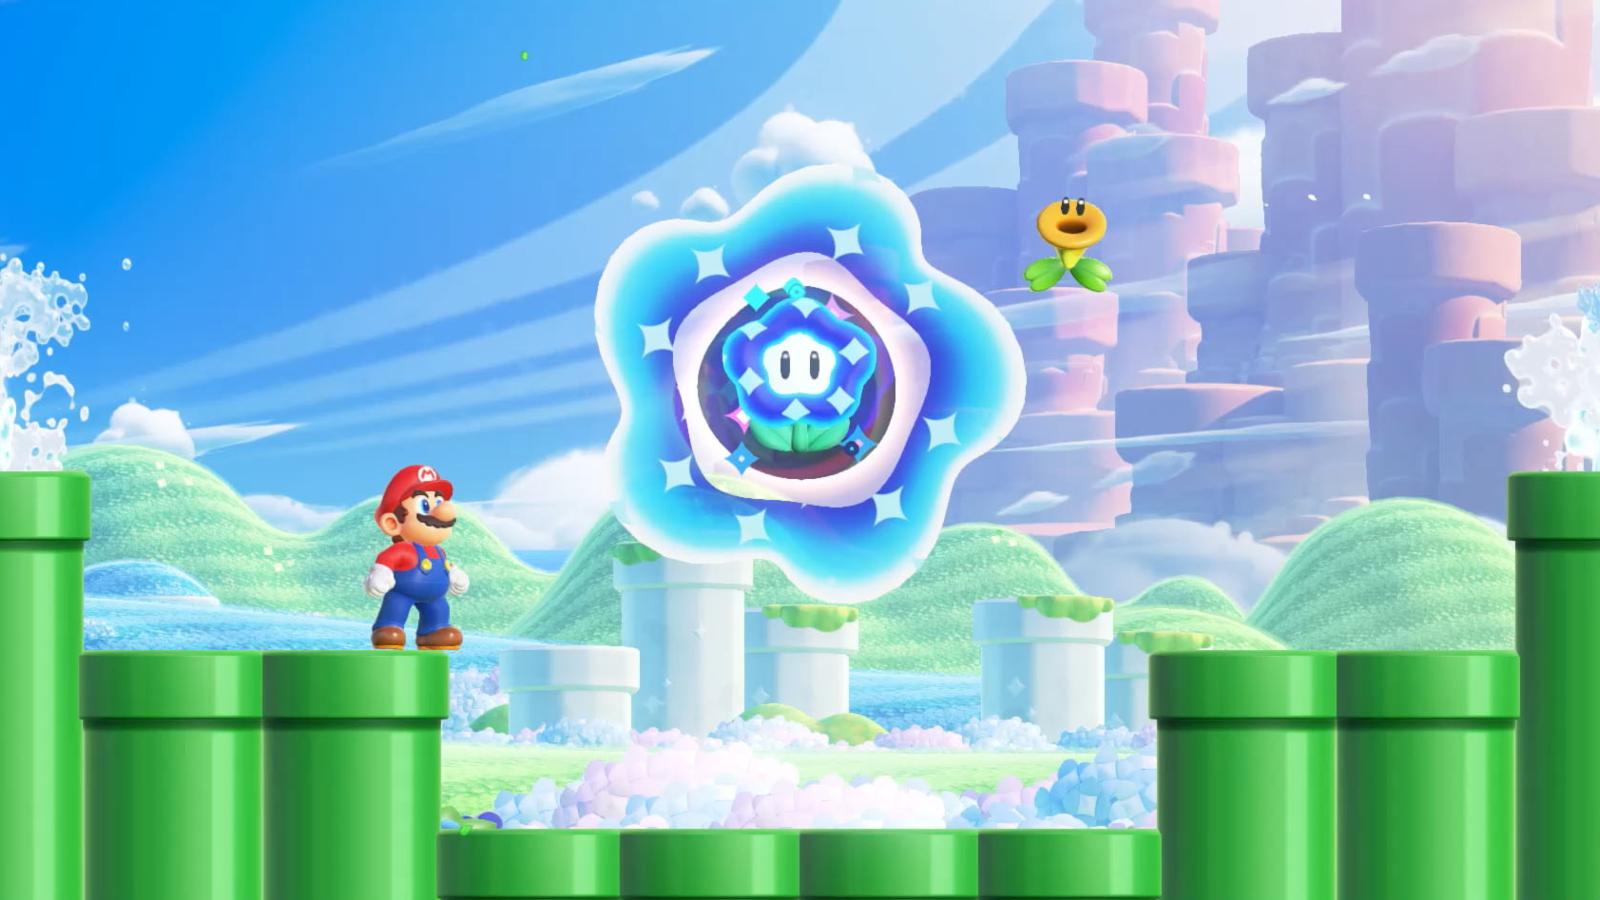 Super Mario Bros. Wonder' Is What Happens When Devs Have Time to Play